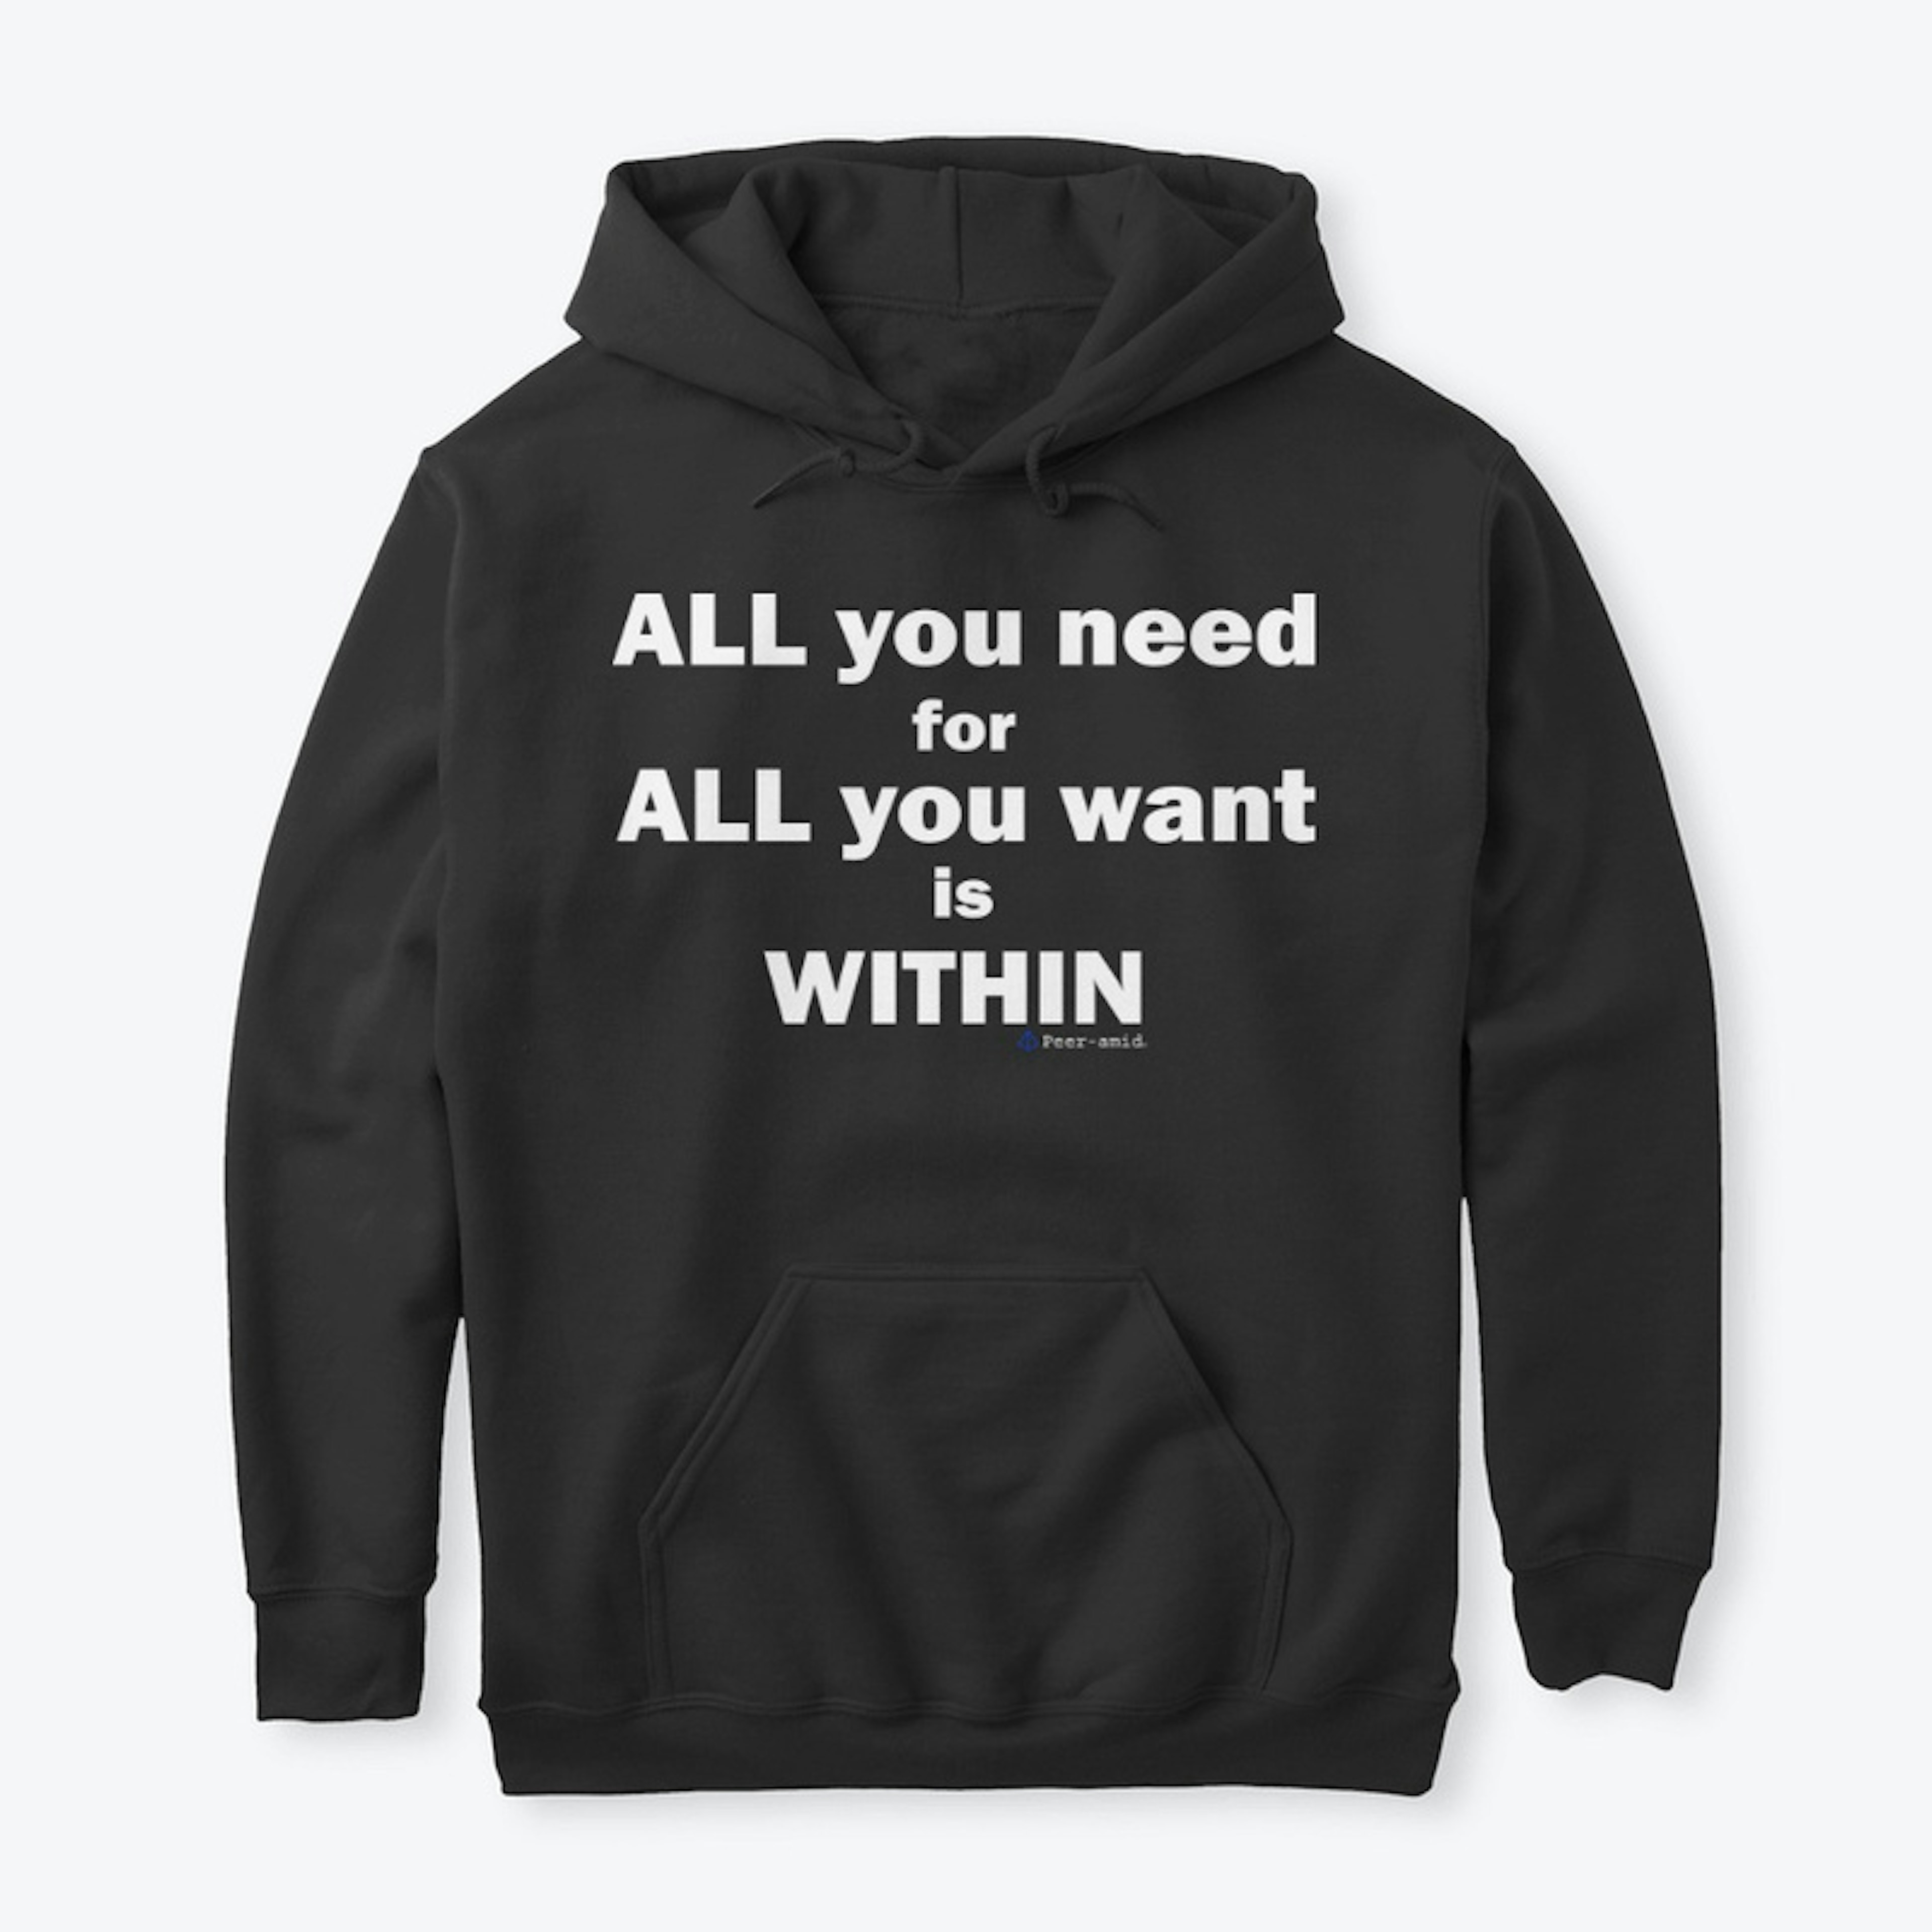 ALL YOU NEED (LARGE PRINT)